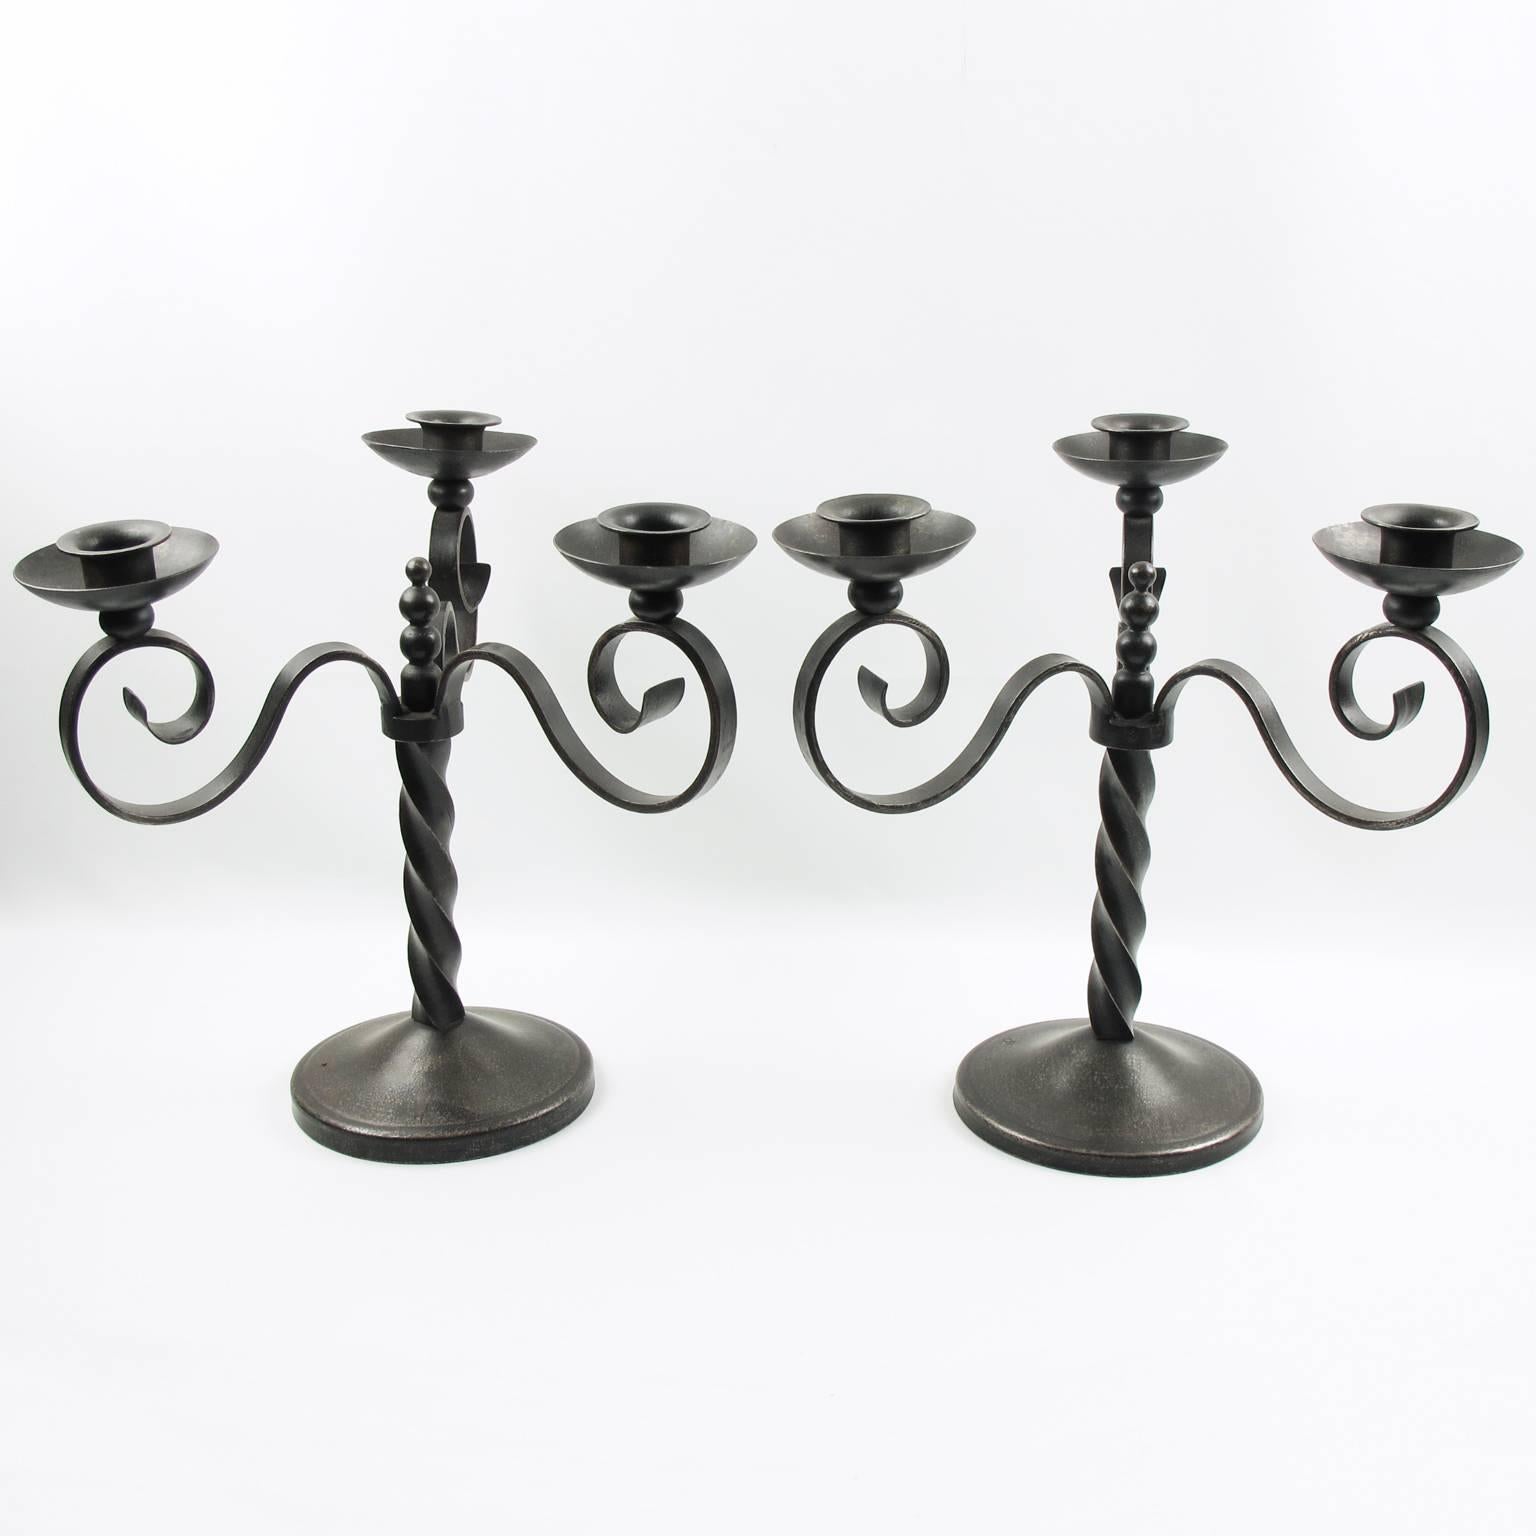 French Charles Piguet Pair of Wrought Iron Candelabra Candle-Holders 3